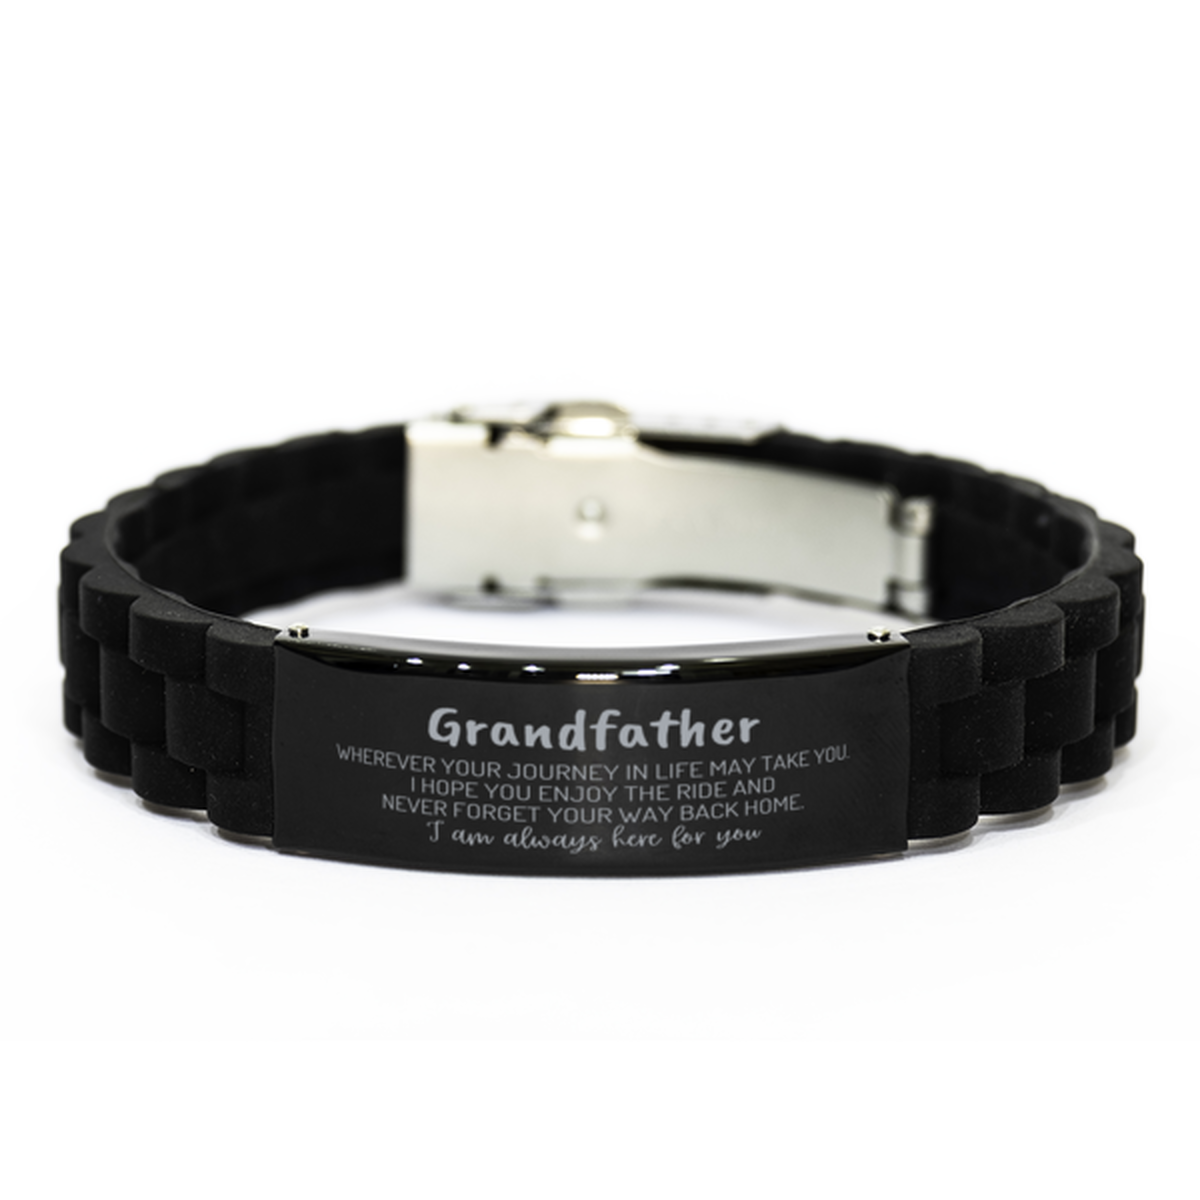 Grandfather wherever your journey in life may take you, I am always here for you Grandfather Black Glidelock Clasp Bracelet, Awesome Christmas Gifts For Grandfather, Grandfather Birthday Gifts for Men Women Family Loved One